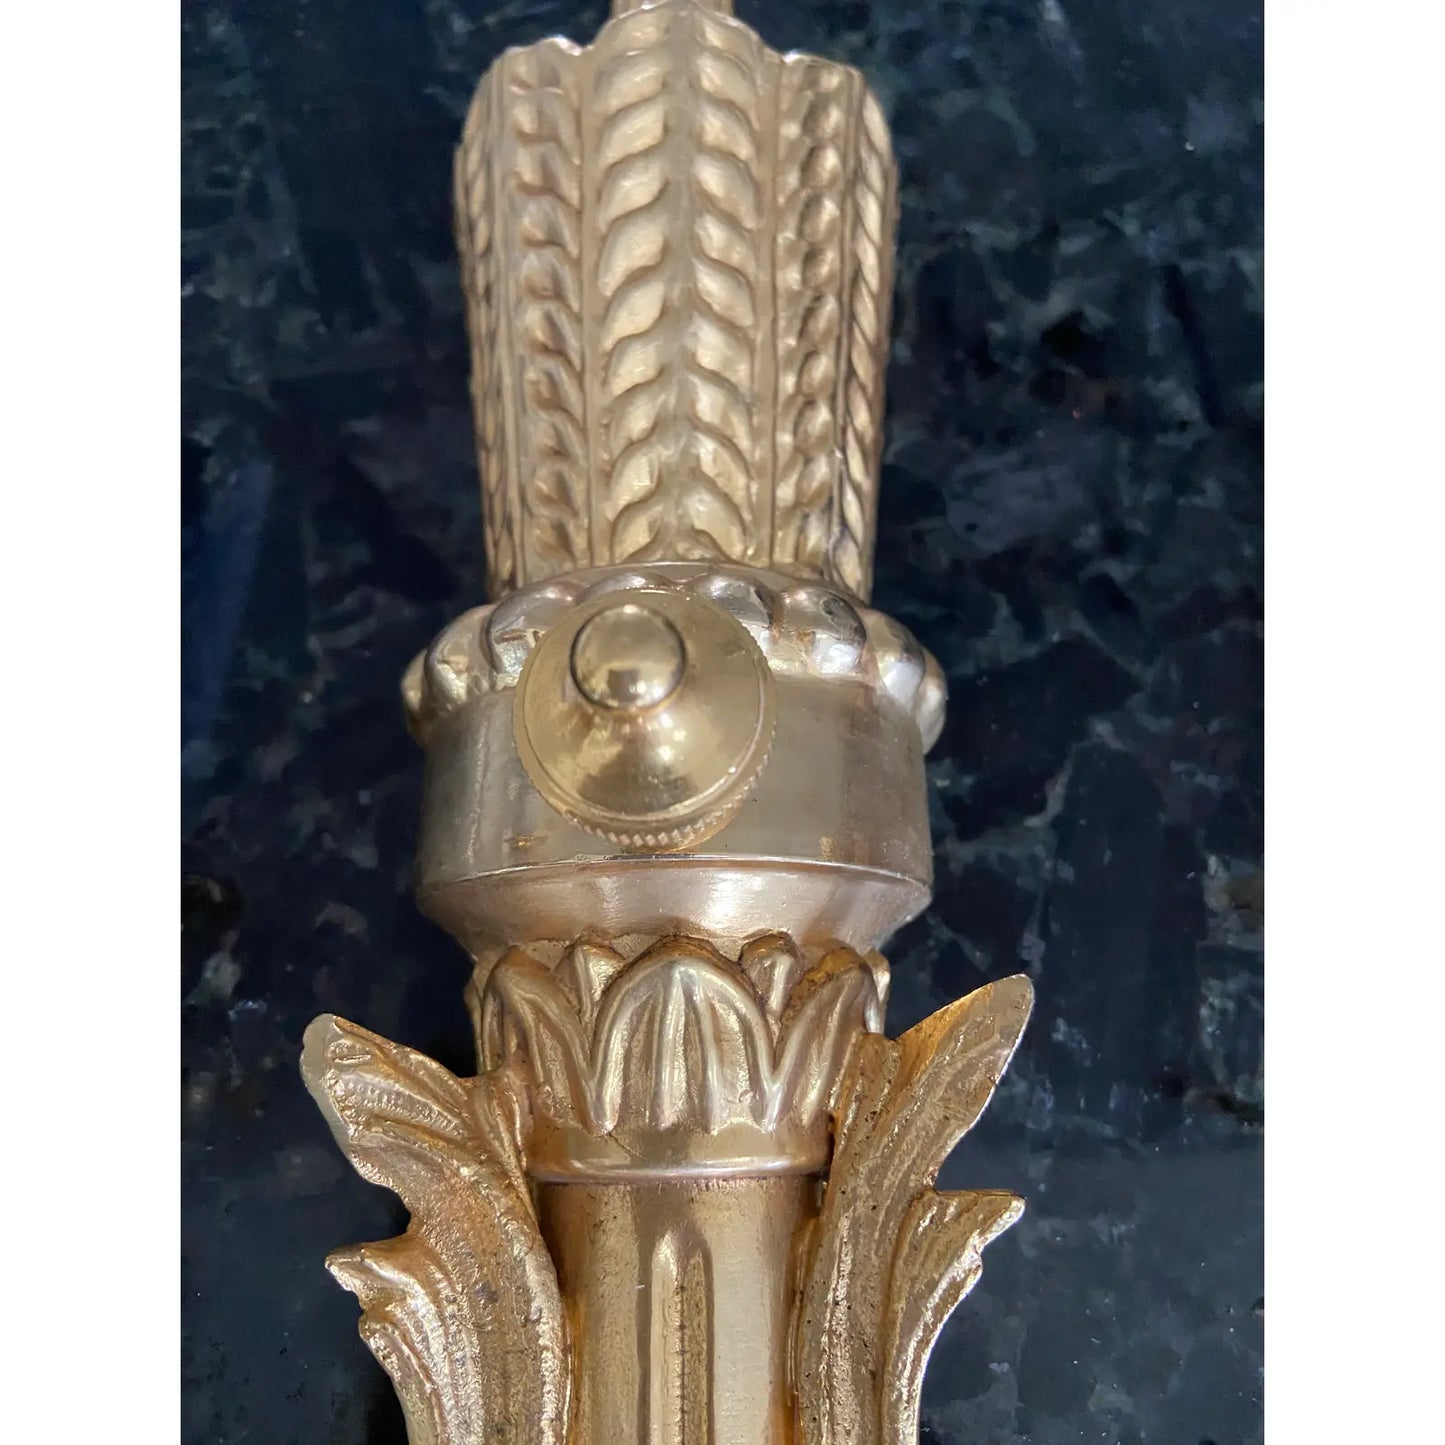 Vintage French Gilded Brass Ribbon Wall Sconce